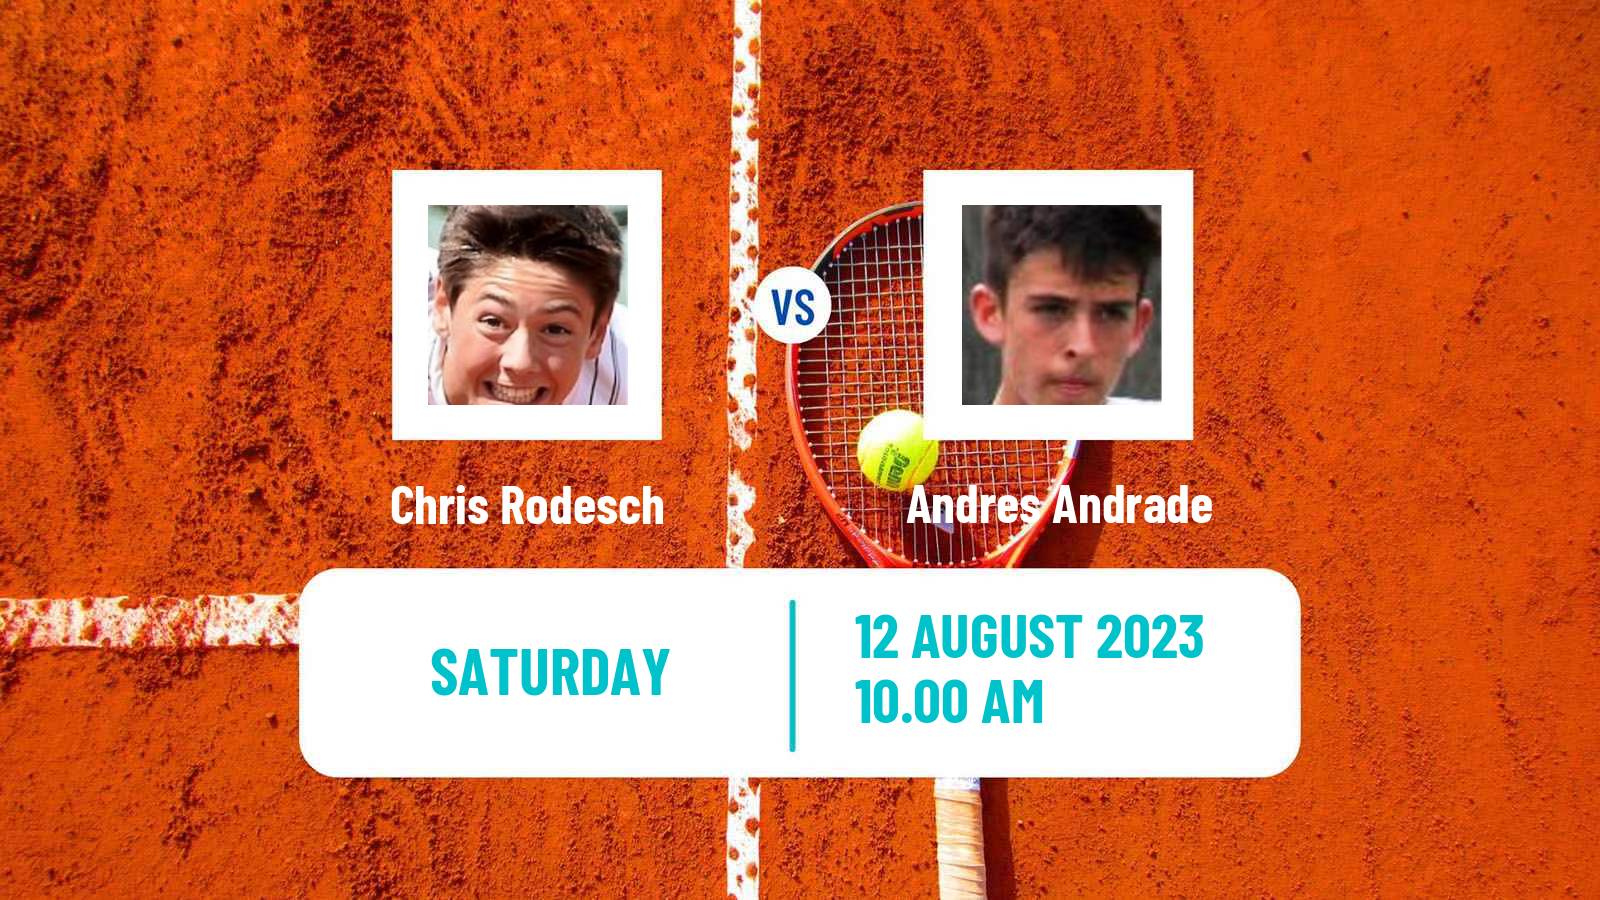 Tennis ITF M25 Southaven Ms Men Chris Rodesch - Andres Andrade